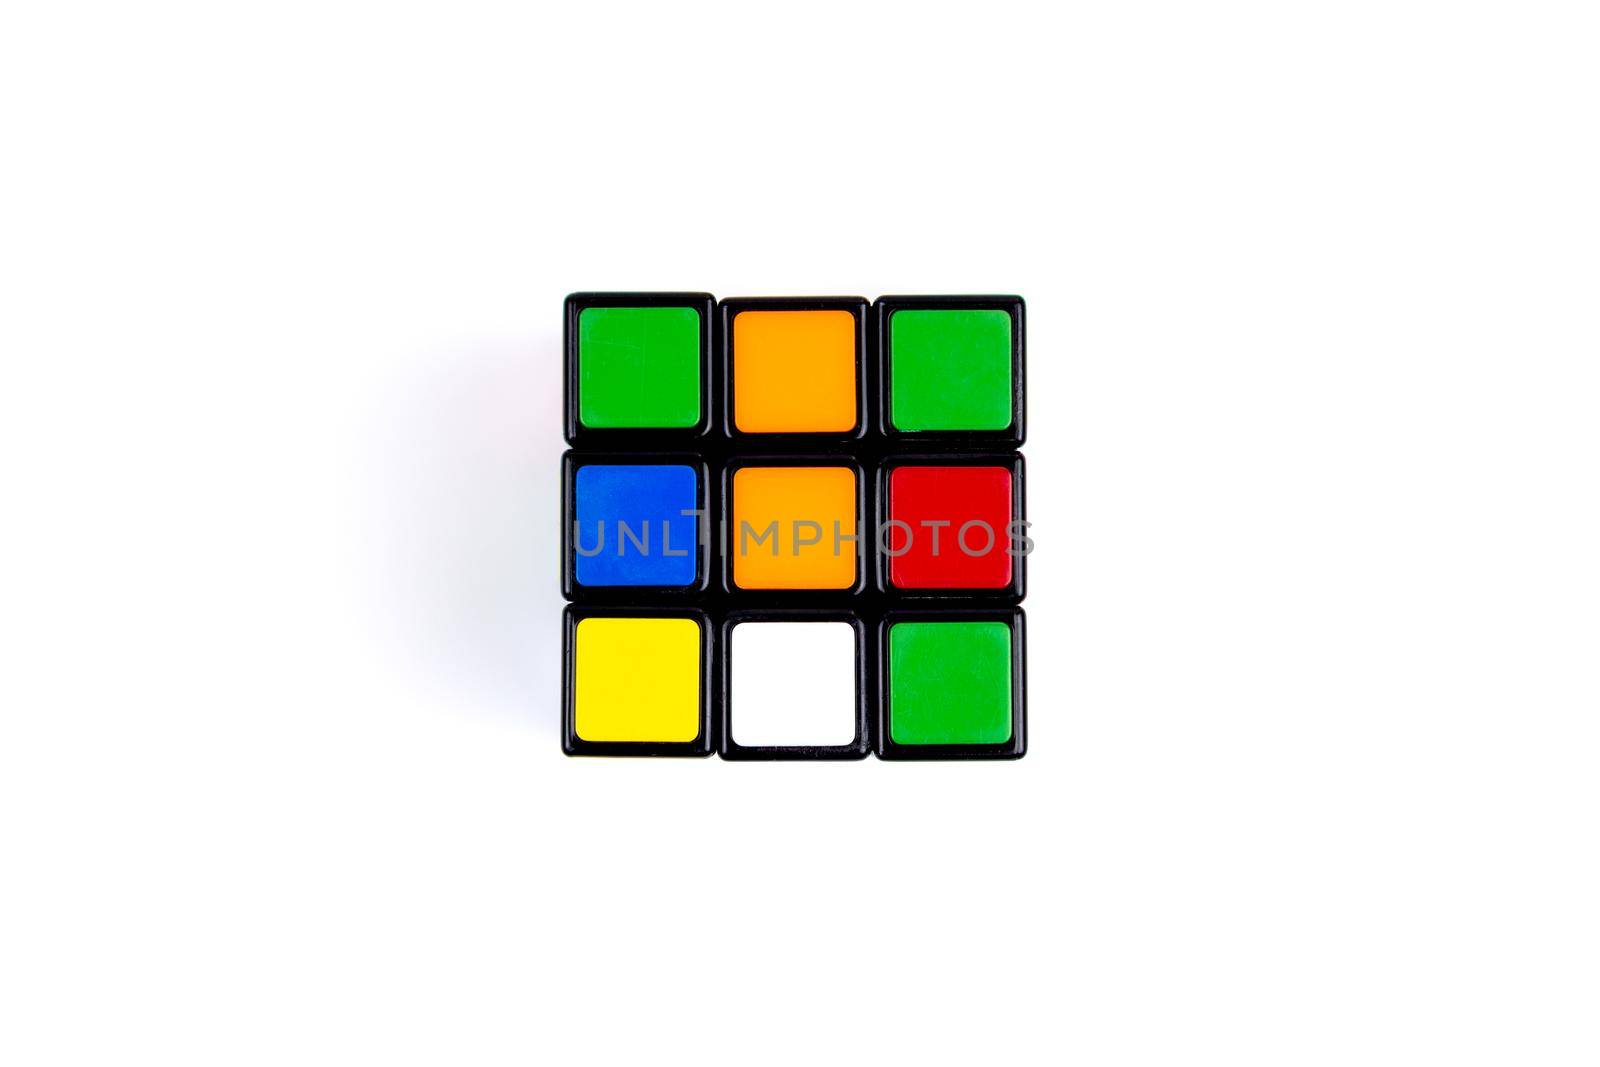 Game multi-colored cube on a white background. Game concept with copy space for text.